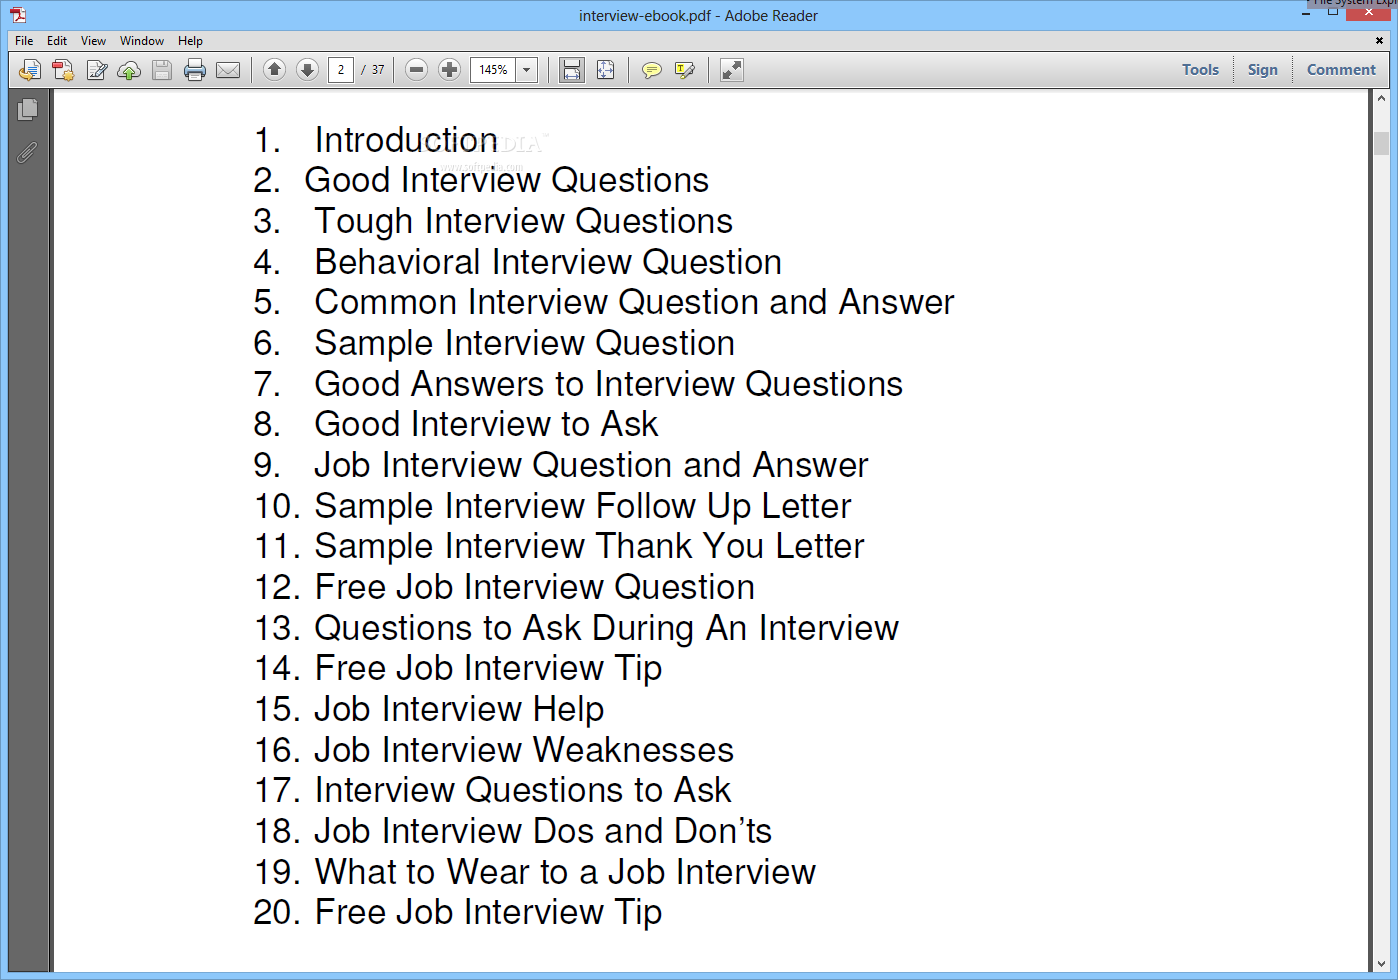 Common Interview Questions And Answers